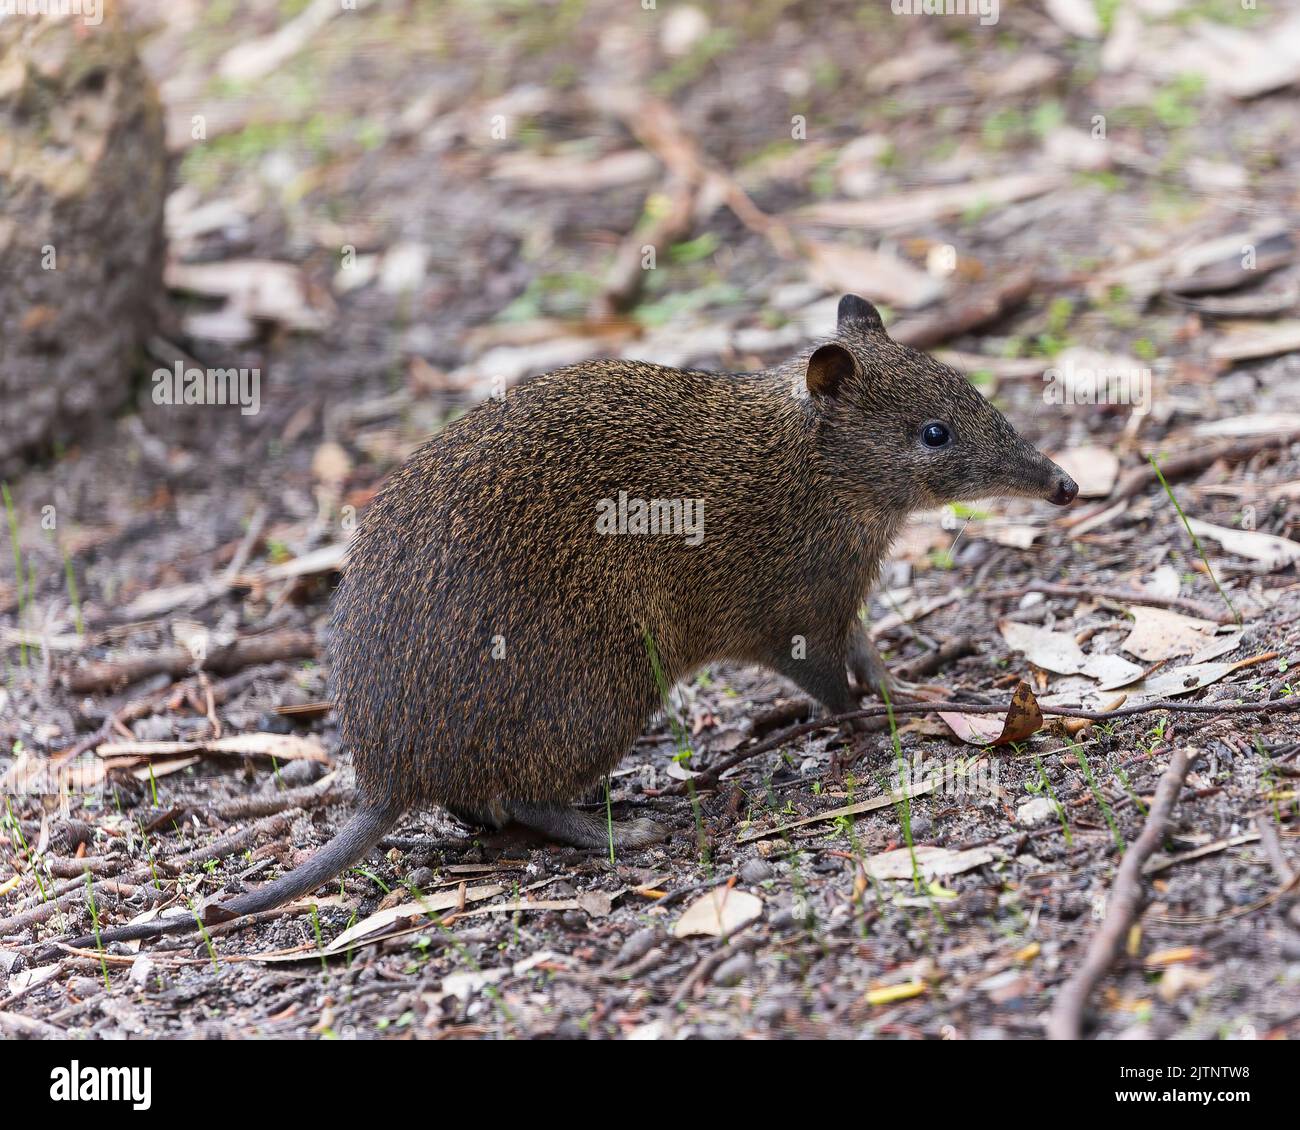 A small marsupial with a long pointed nose, black eyes and small round ears Southwestern Brown Bandicoot or Quenda (Isoodon fusciventer) Stock Photo